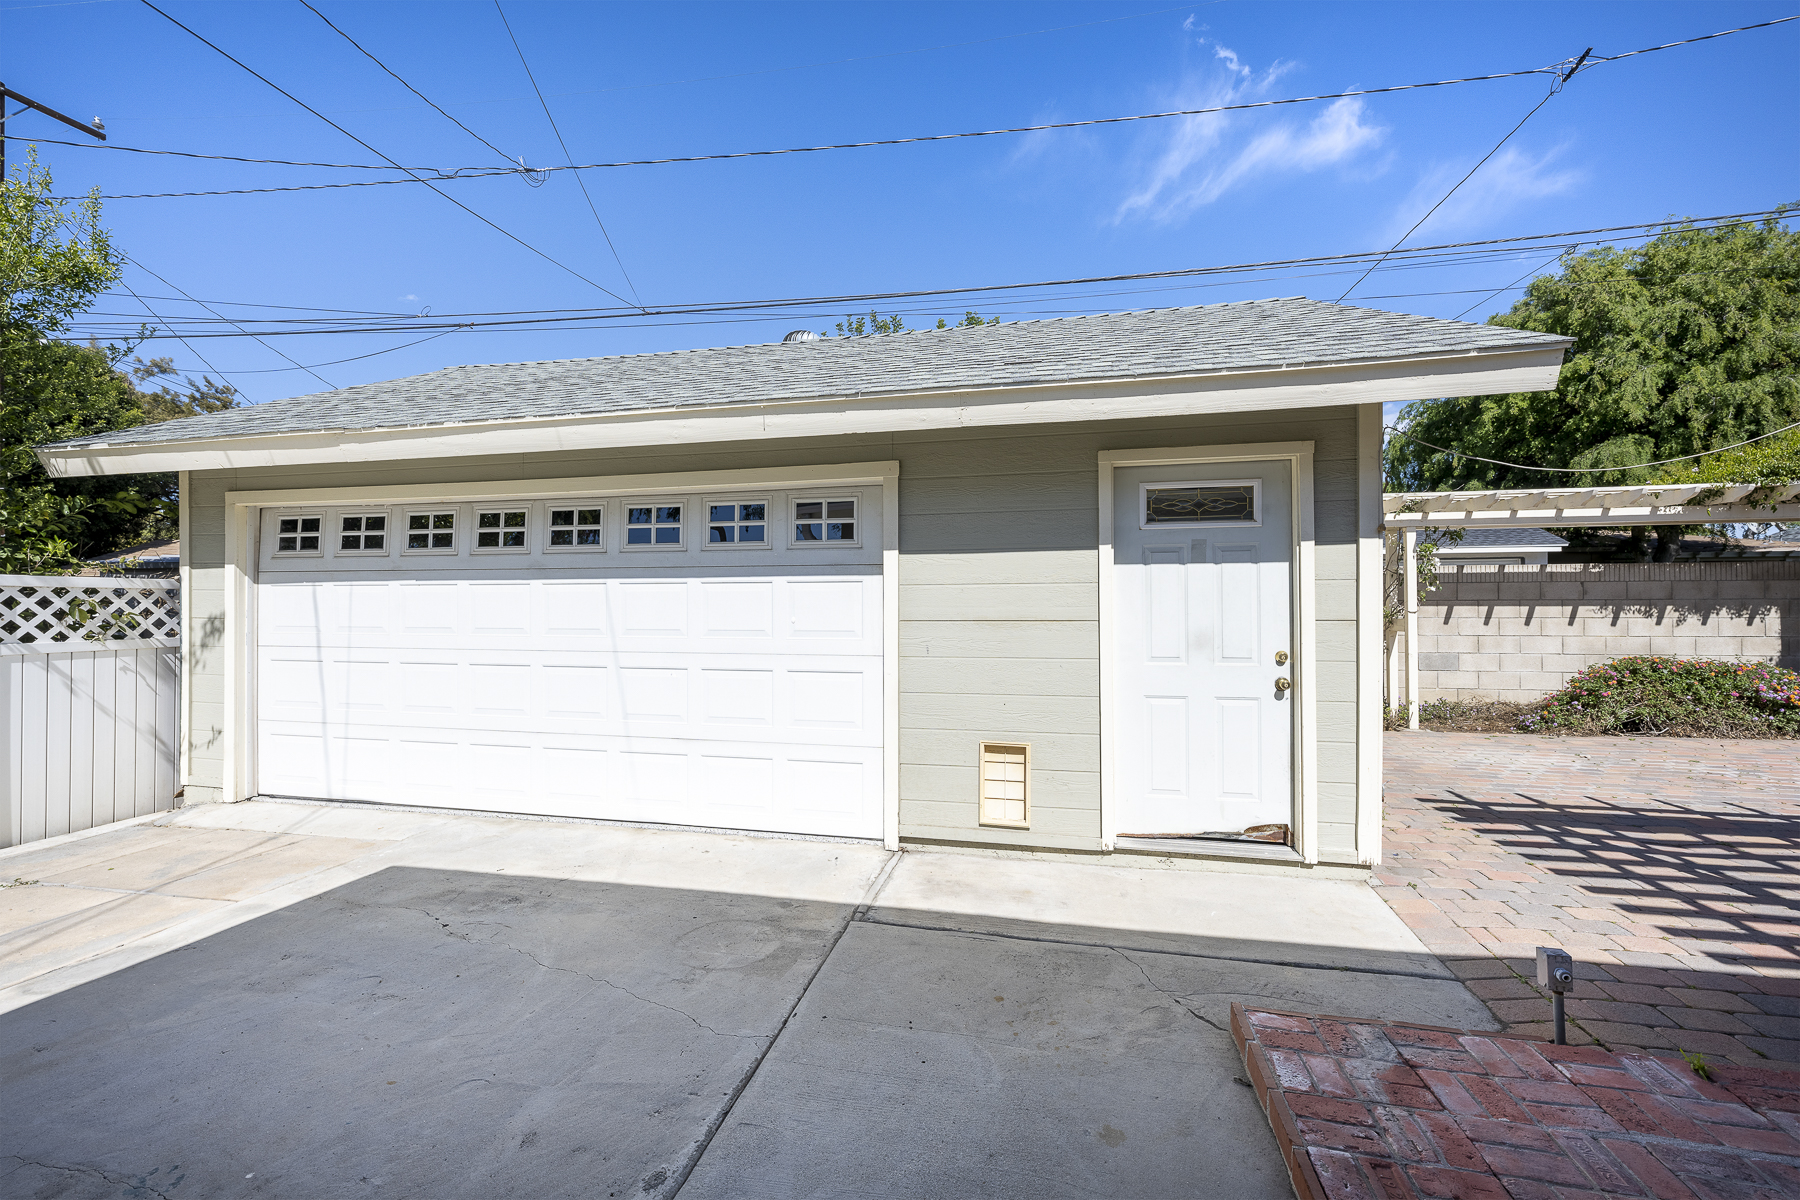 1229 Grove Place Fullerton CA 92831: Garage and side door closed